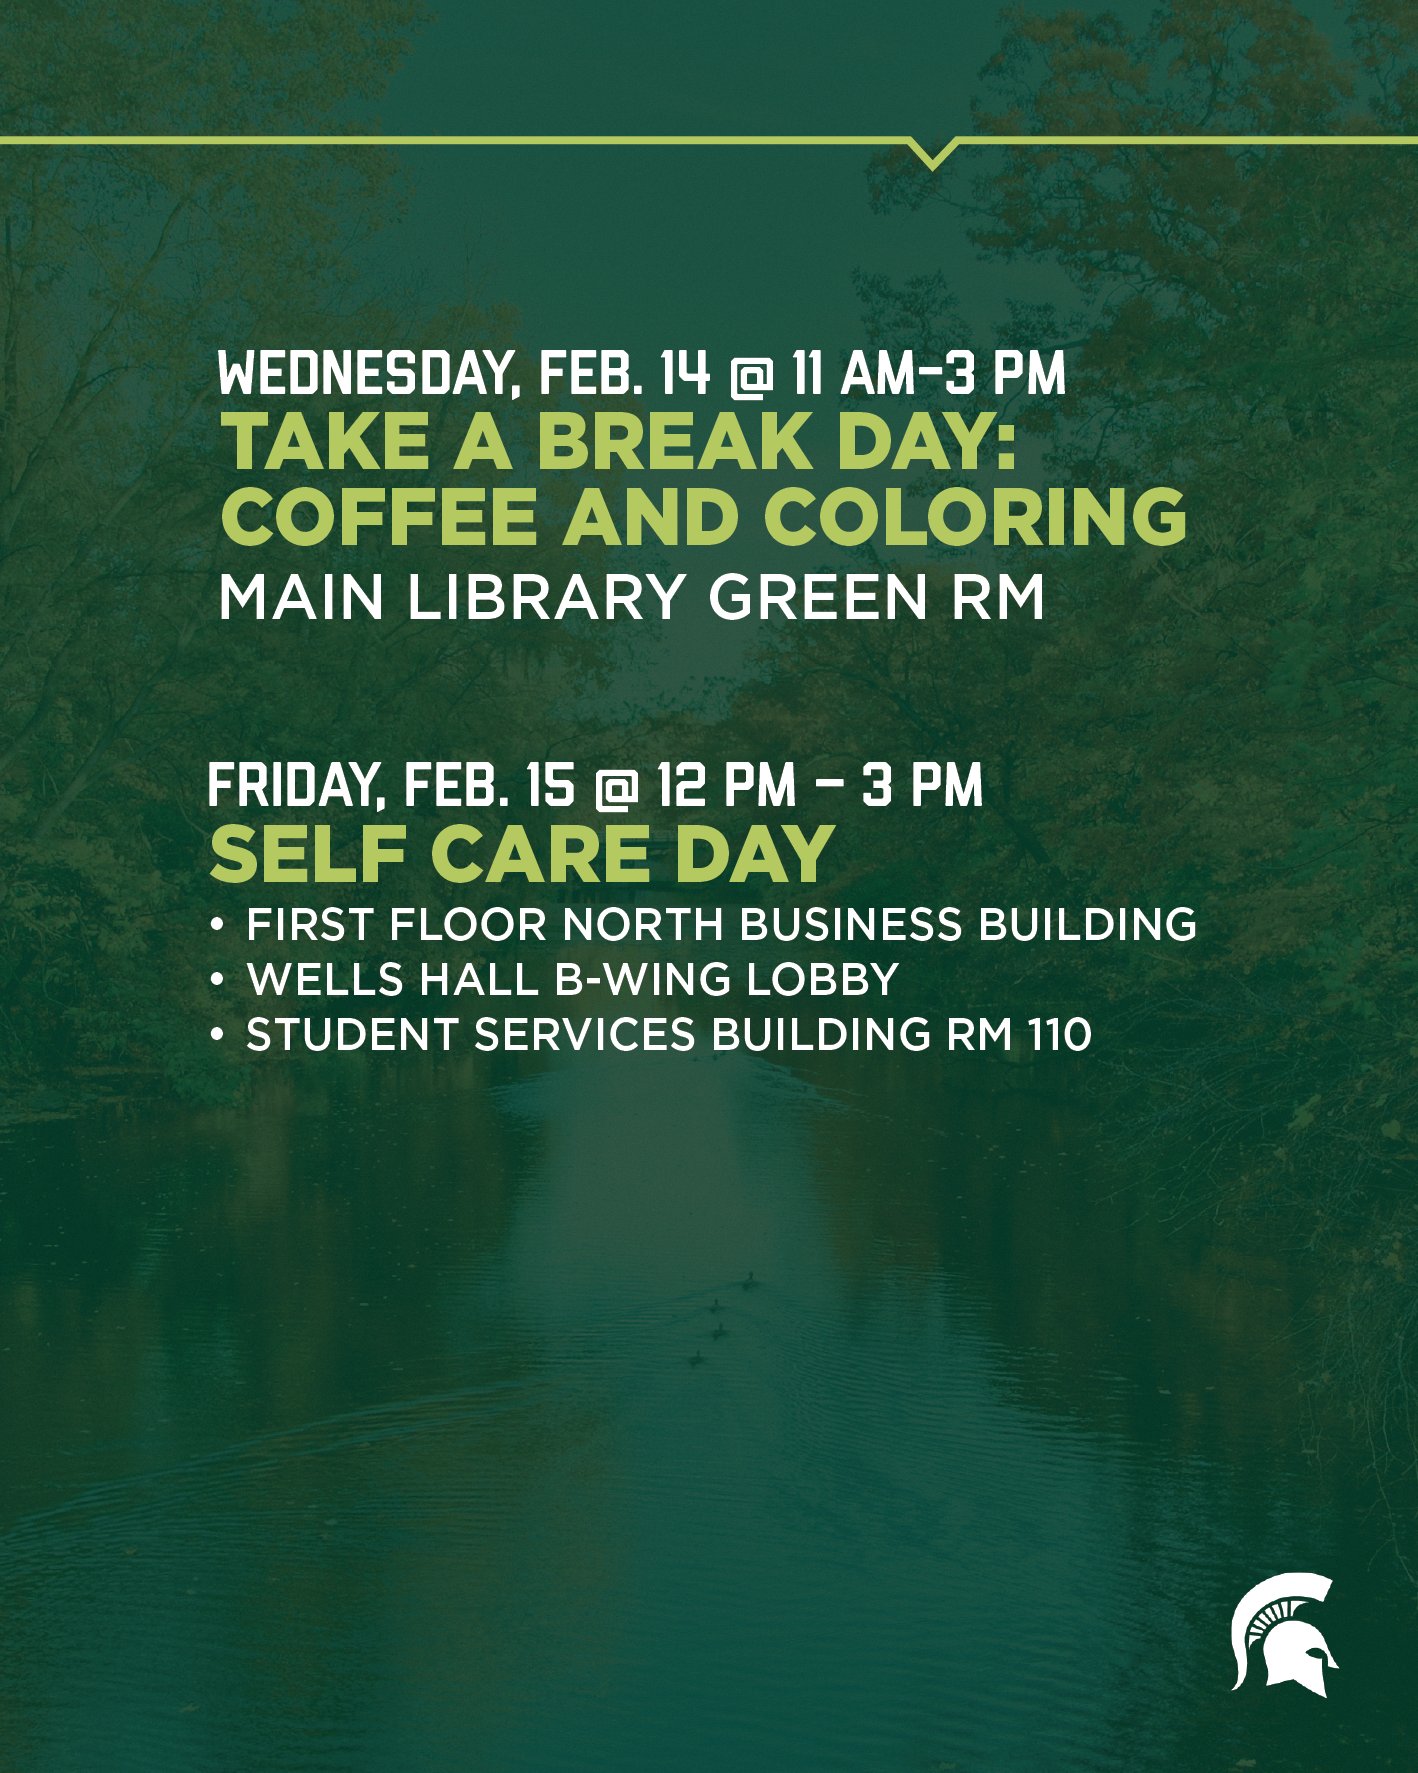 February 14 at 11 AM - 3 PM is a take a break day with coffee and coloring in the Main Library Green Room and February 15 from 12 PM to 3 PM is a self care day held on the first floor of the north business building, wells hall b-wing lobby and the student services building room 110